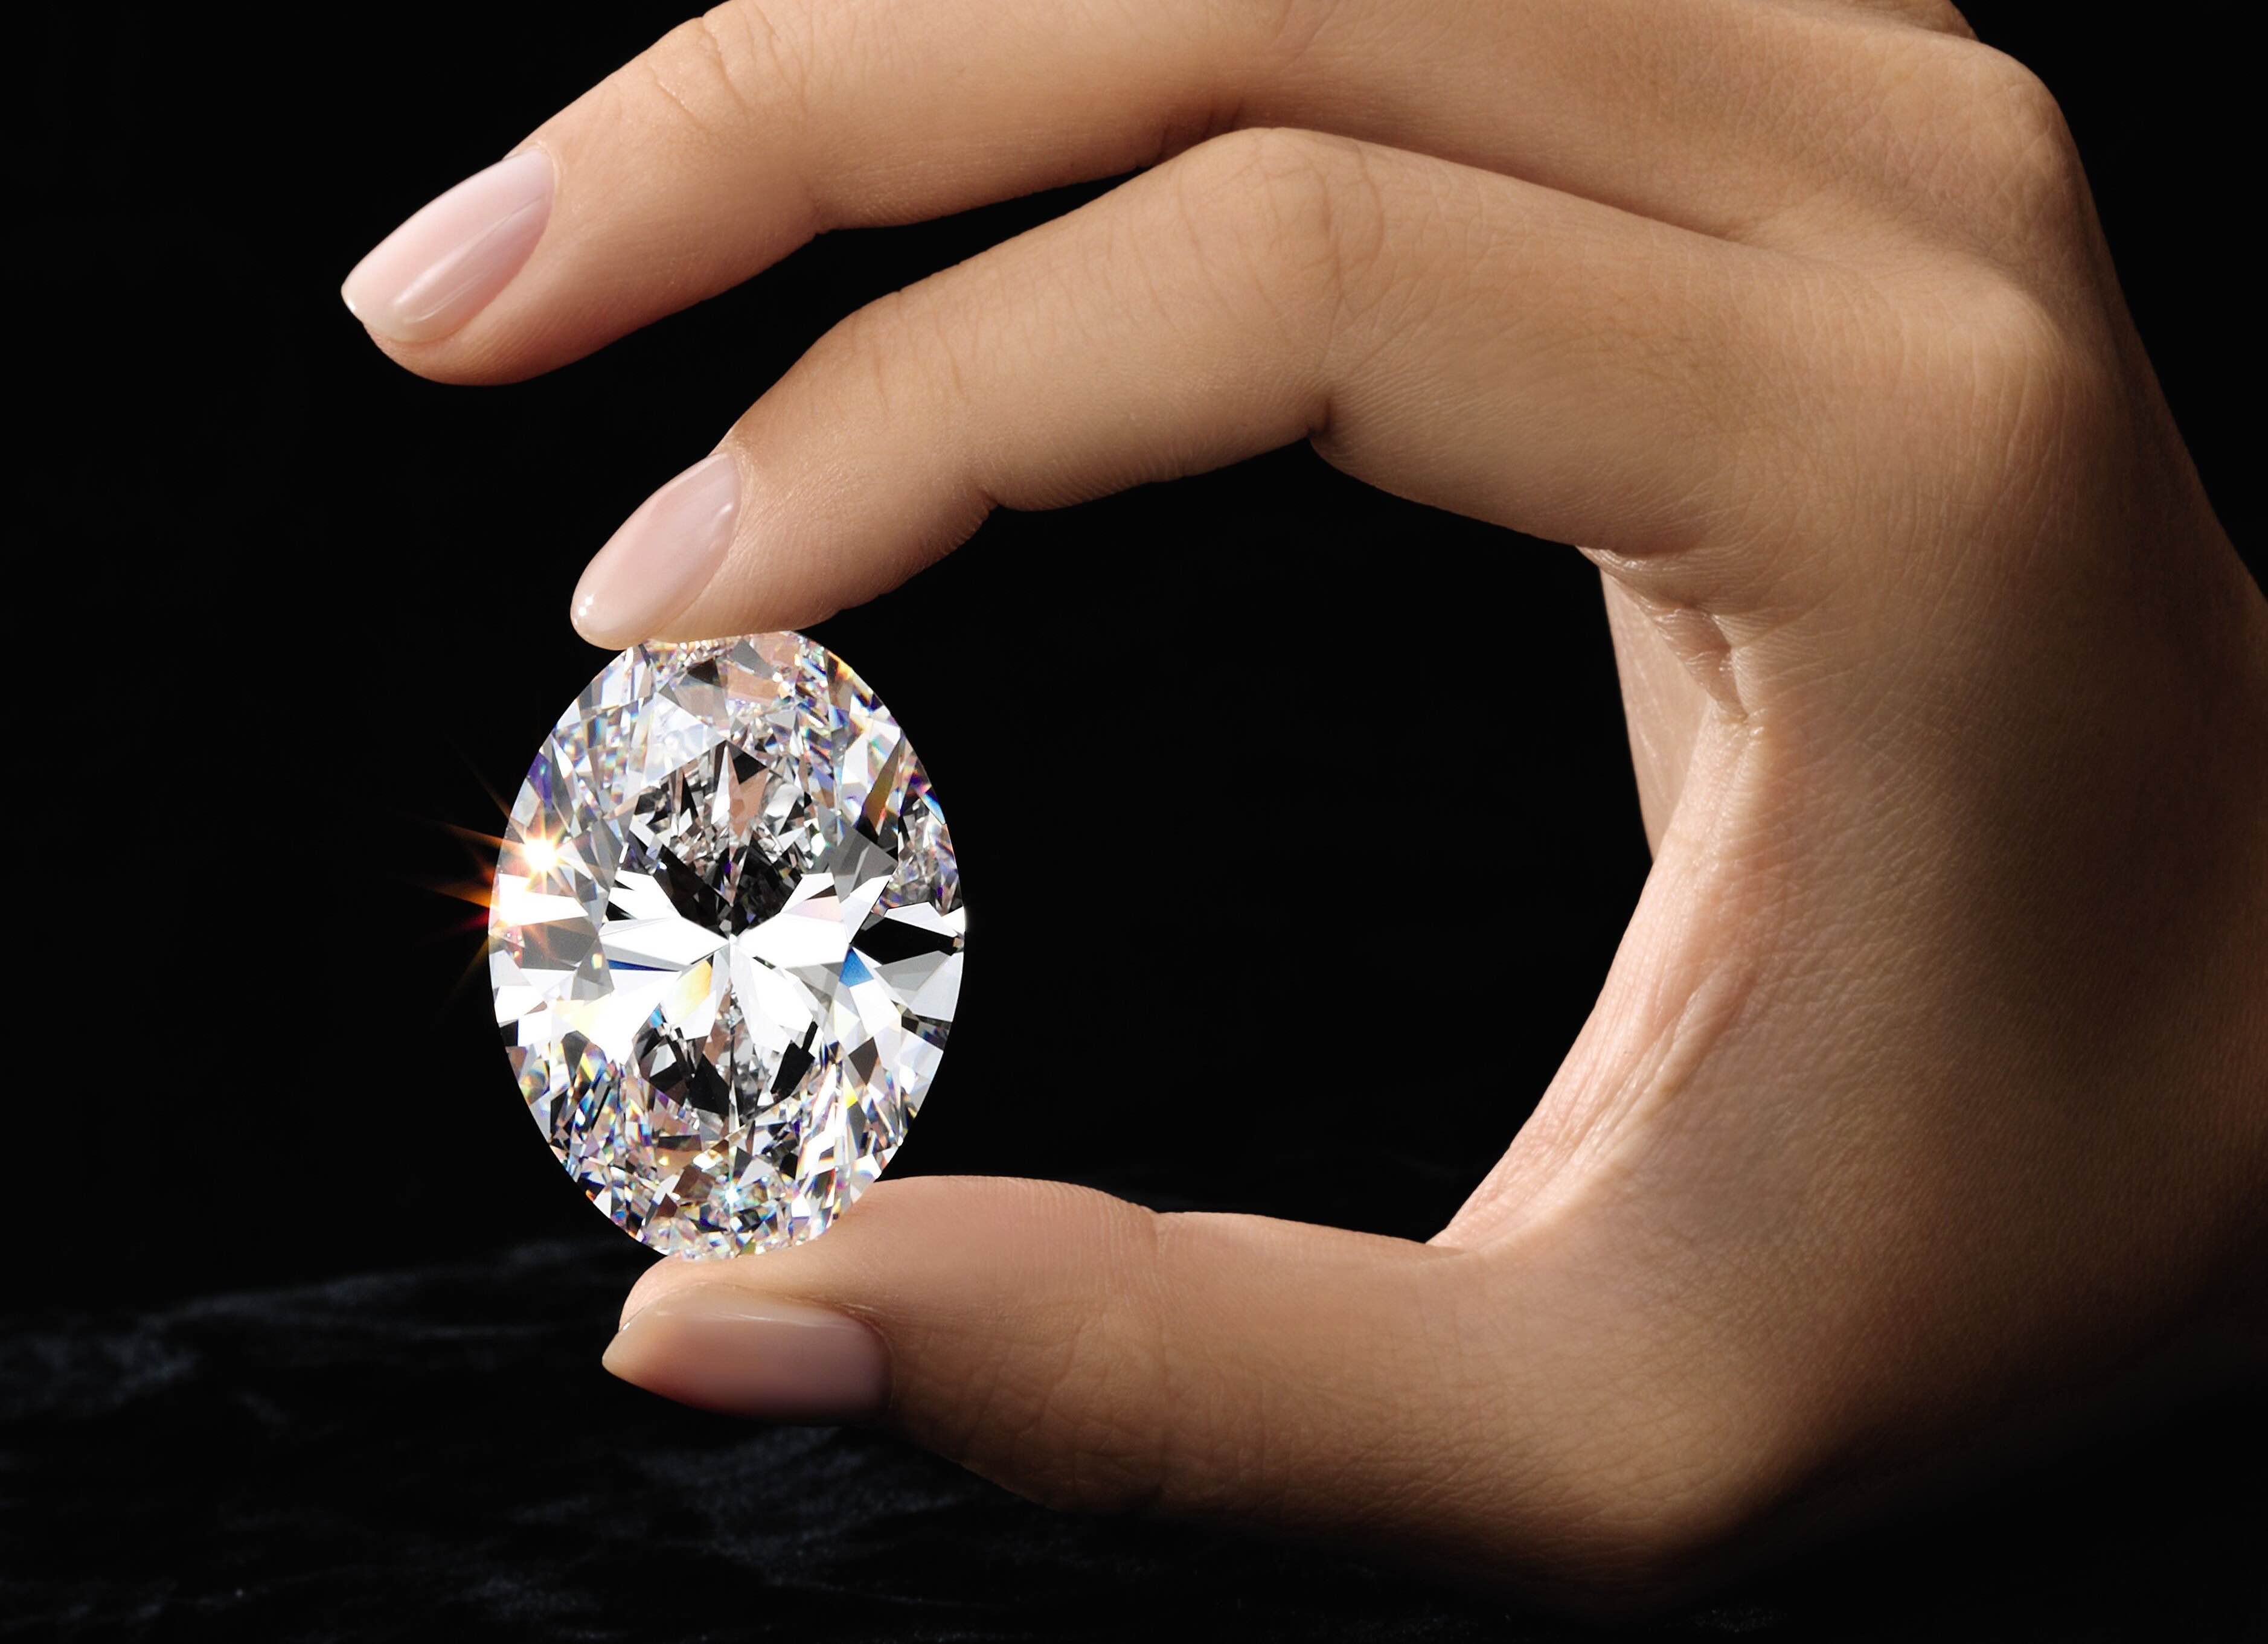 An 88.22-carat diamond set to be auctioned off by Sotheby’s in Hong Kong later this year. Photo via Sotheby’s.